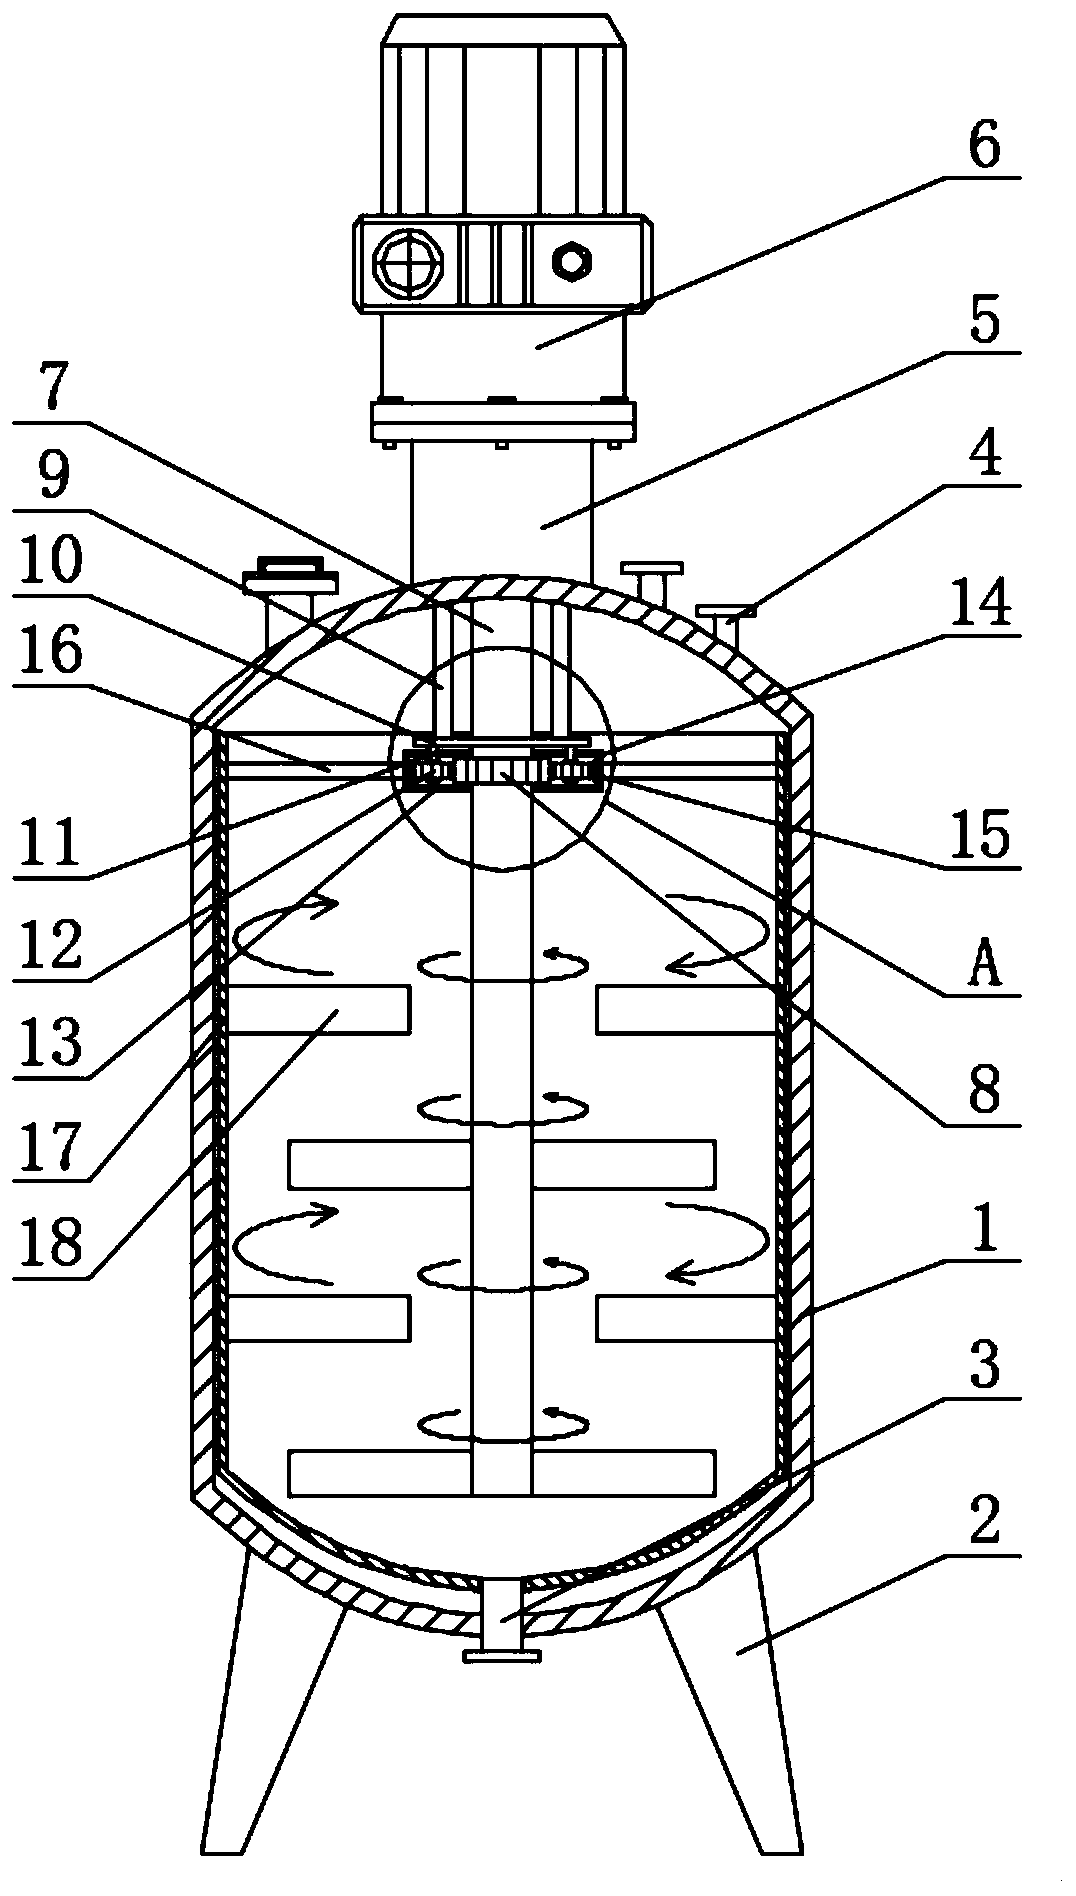 Batching device for waterproof material construction